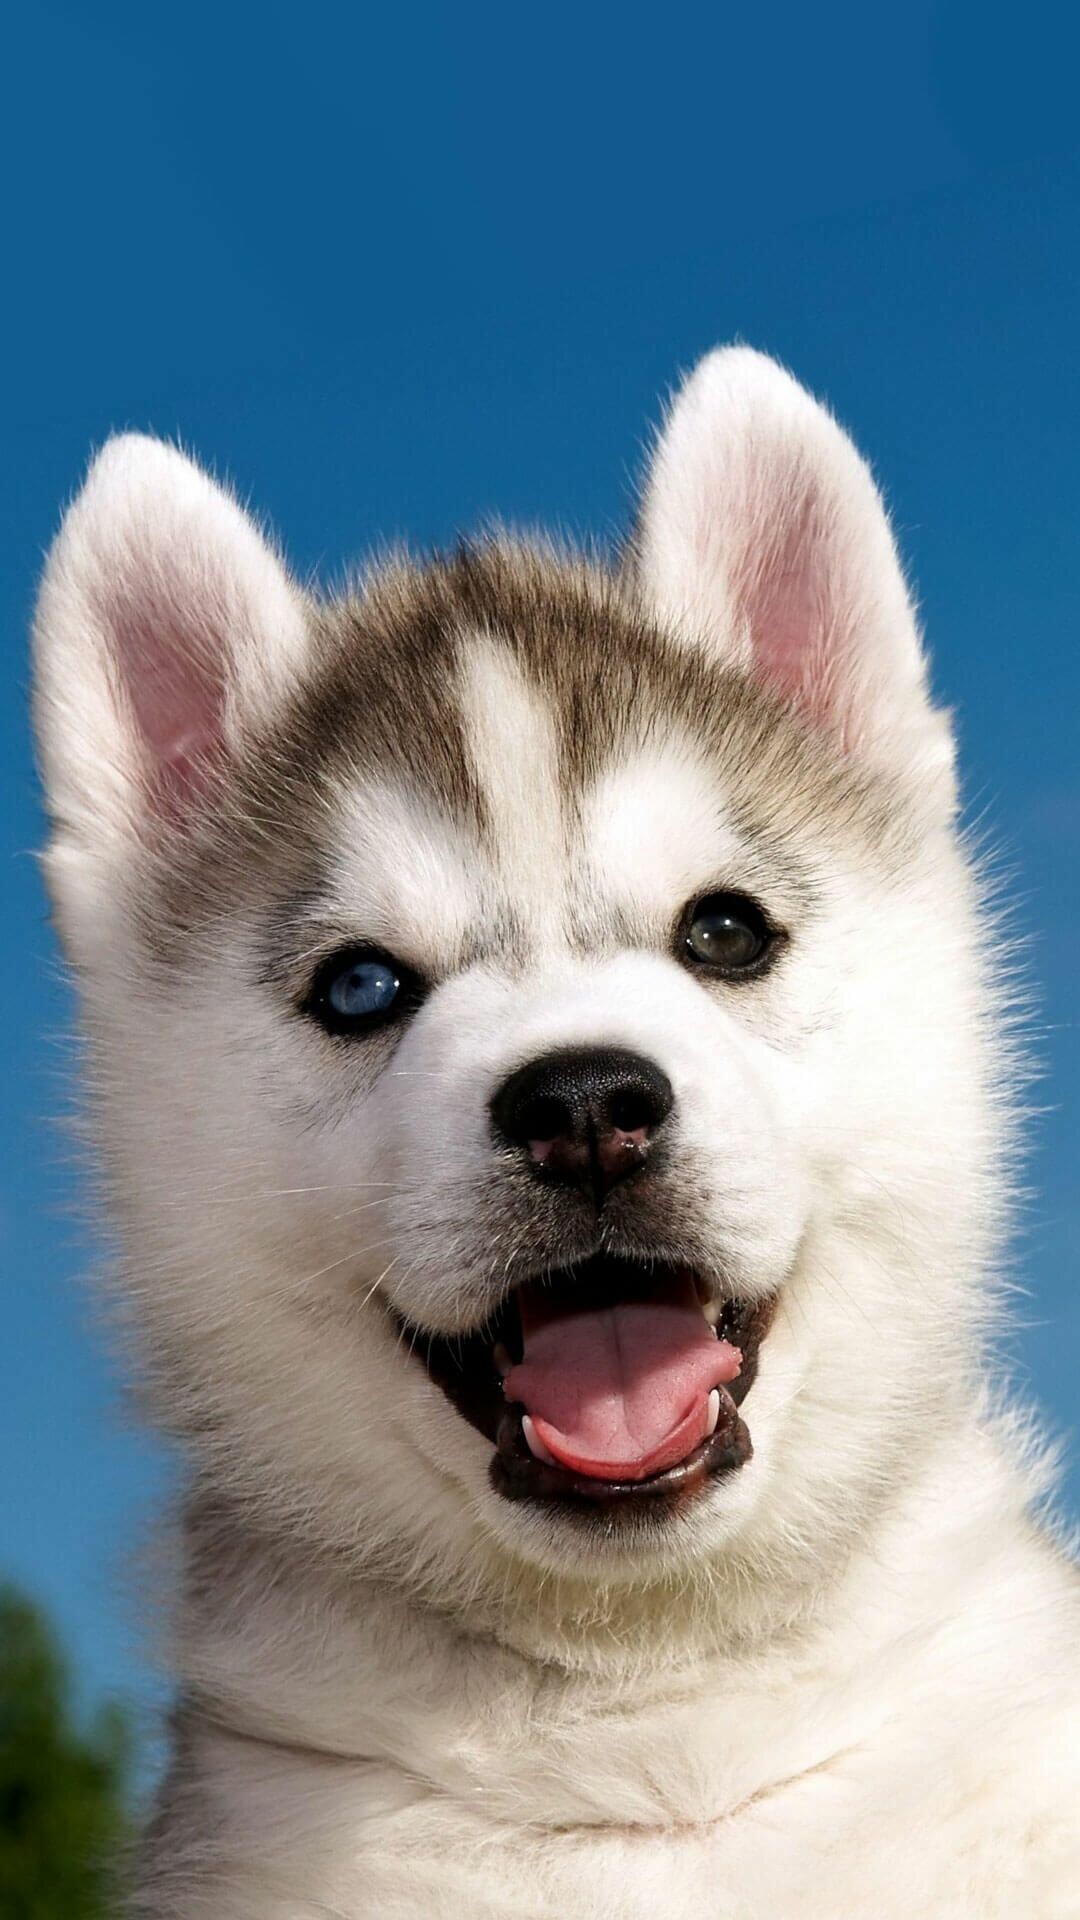 Cute Husky puppy, iPhone wallpaper, Dog lover's delight, Phone background perfection, 1080x1920 Full HD Phone